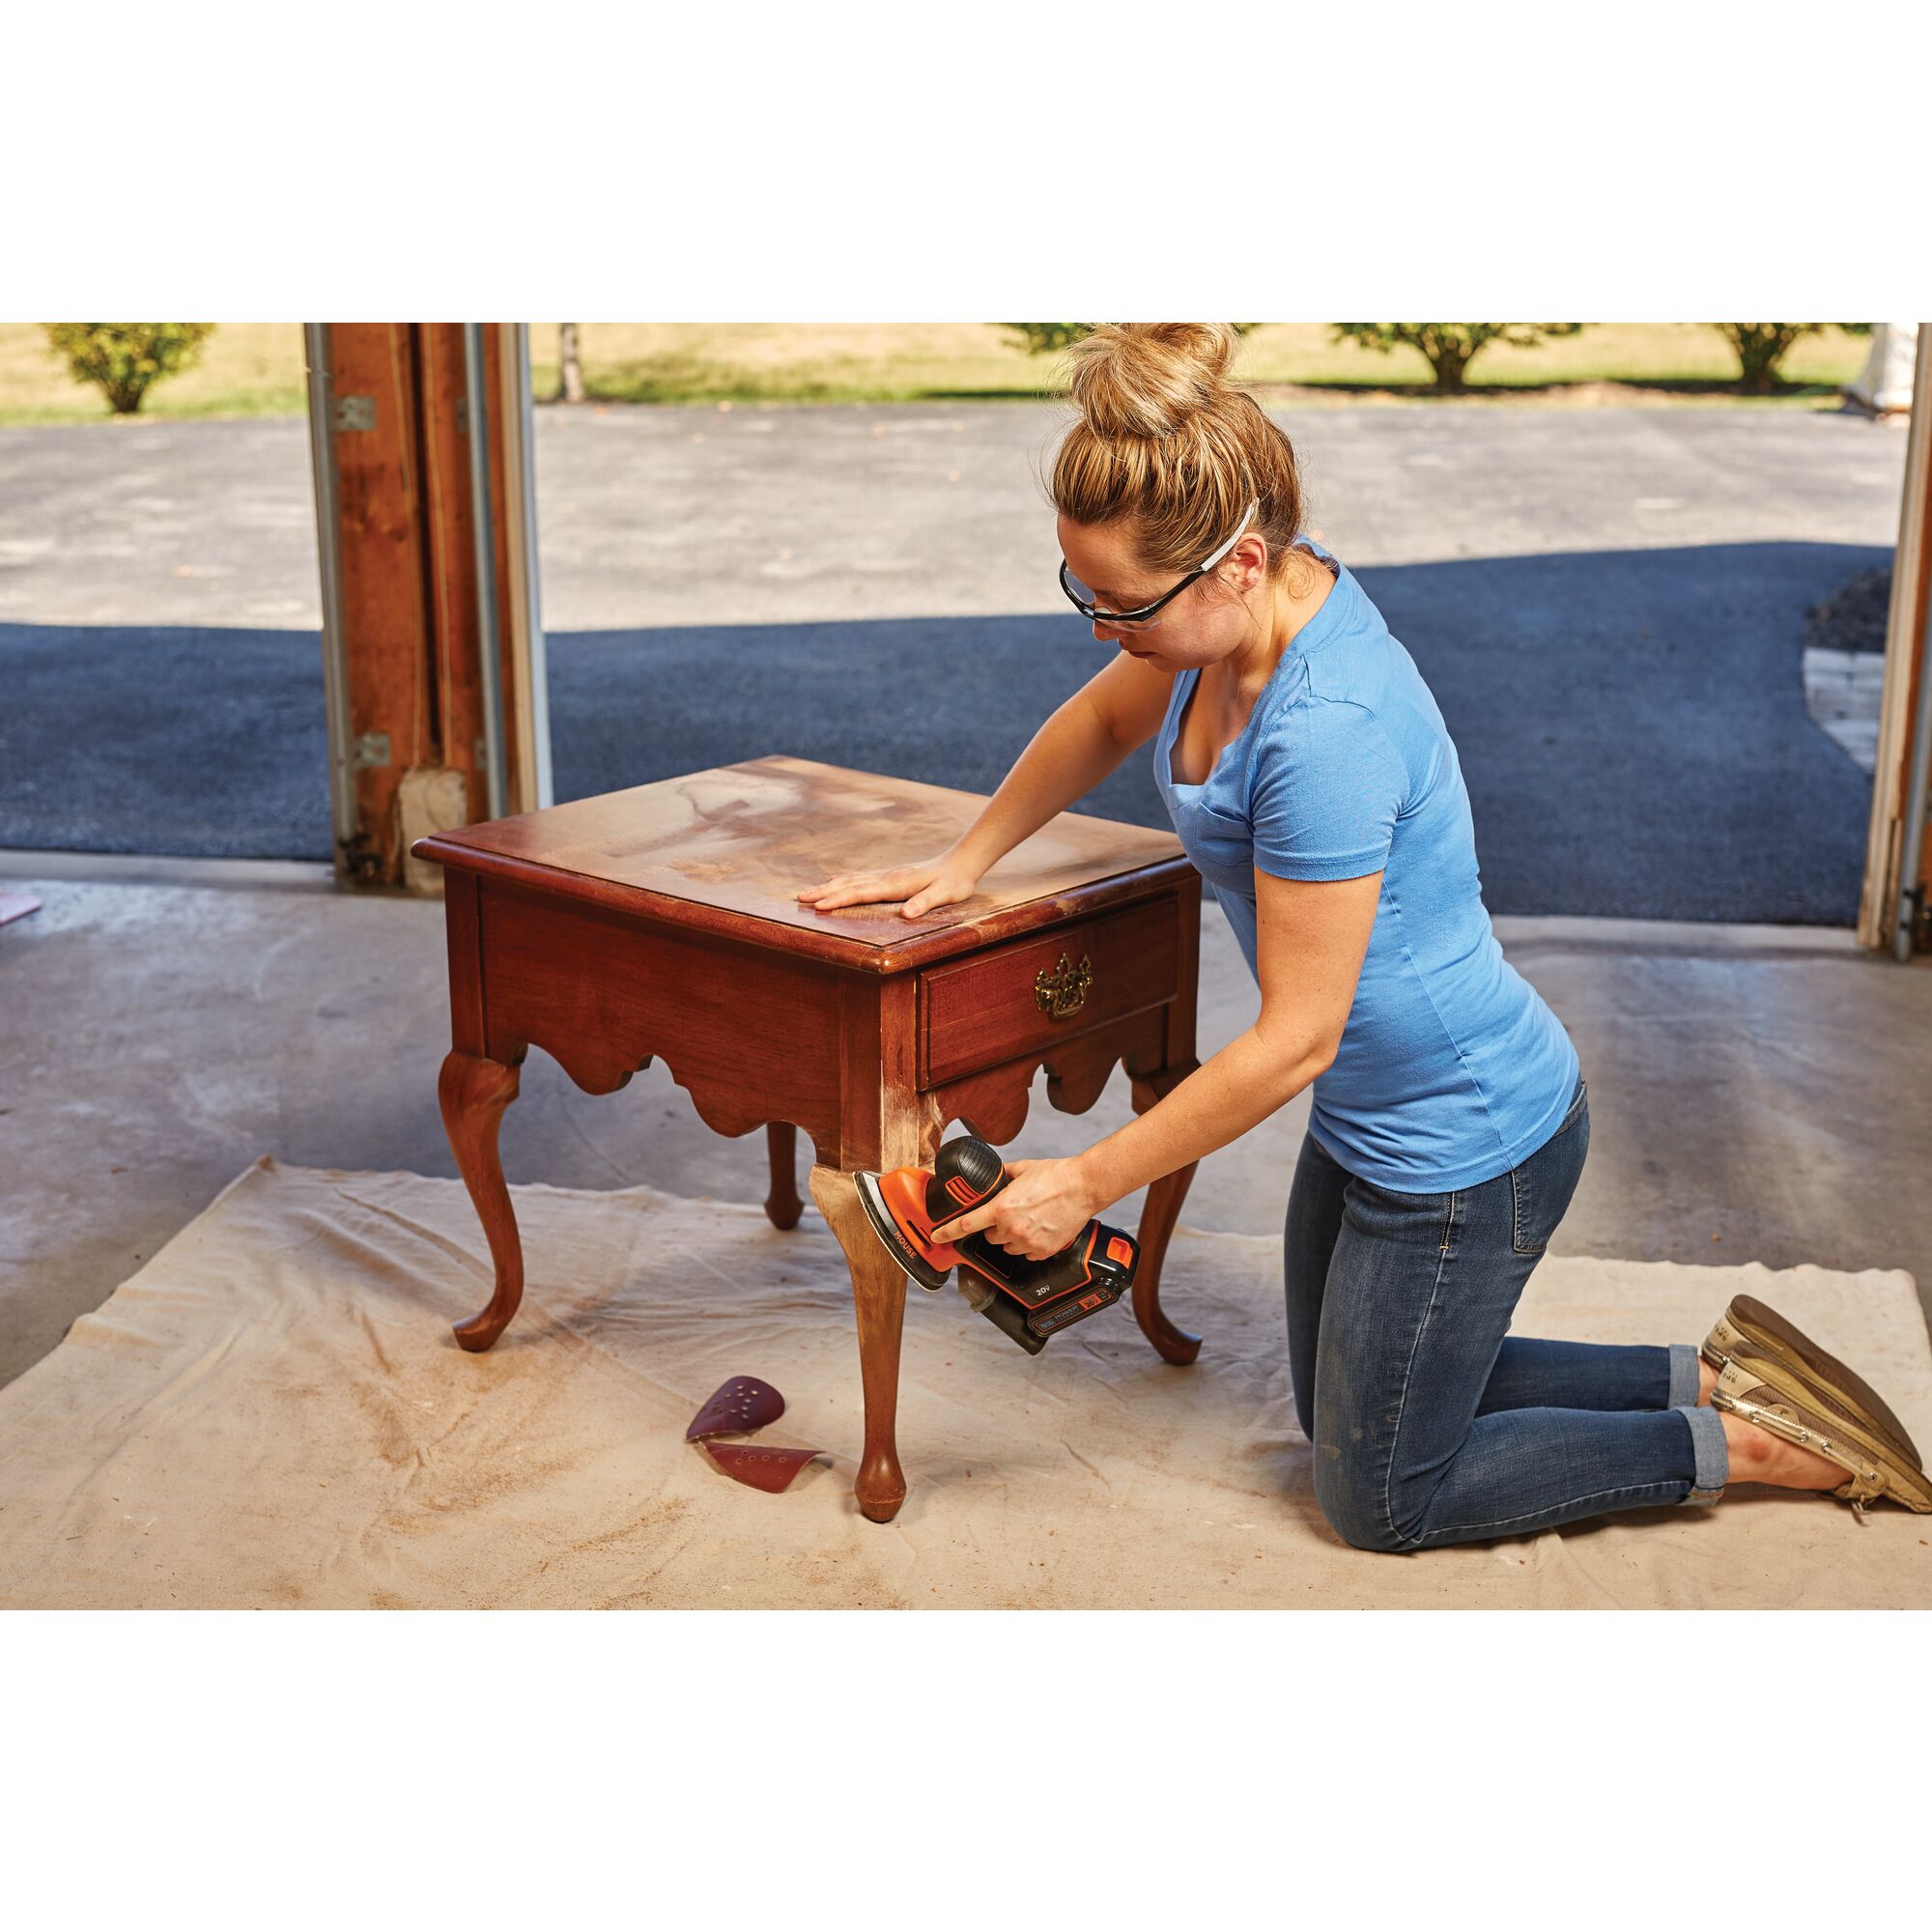 20 volt max mouse cordless sander being used by a person to sand wooden table.